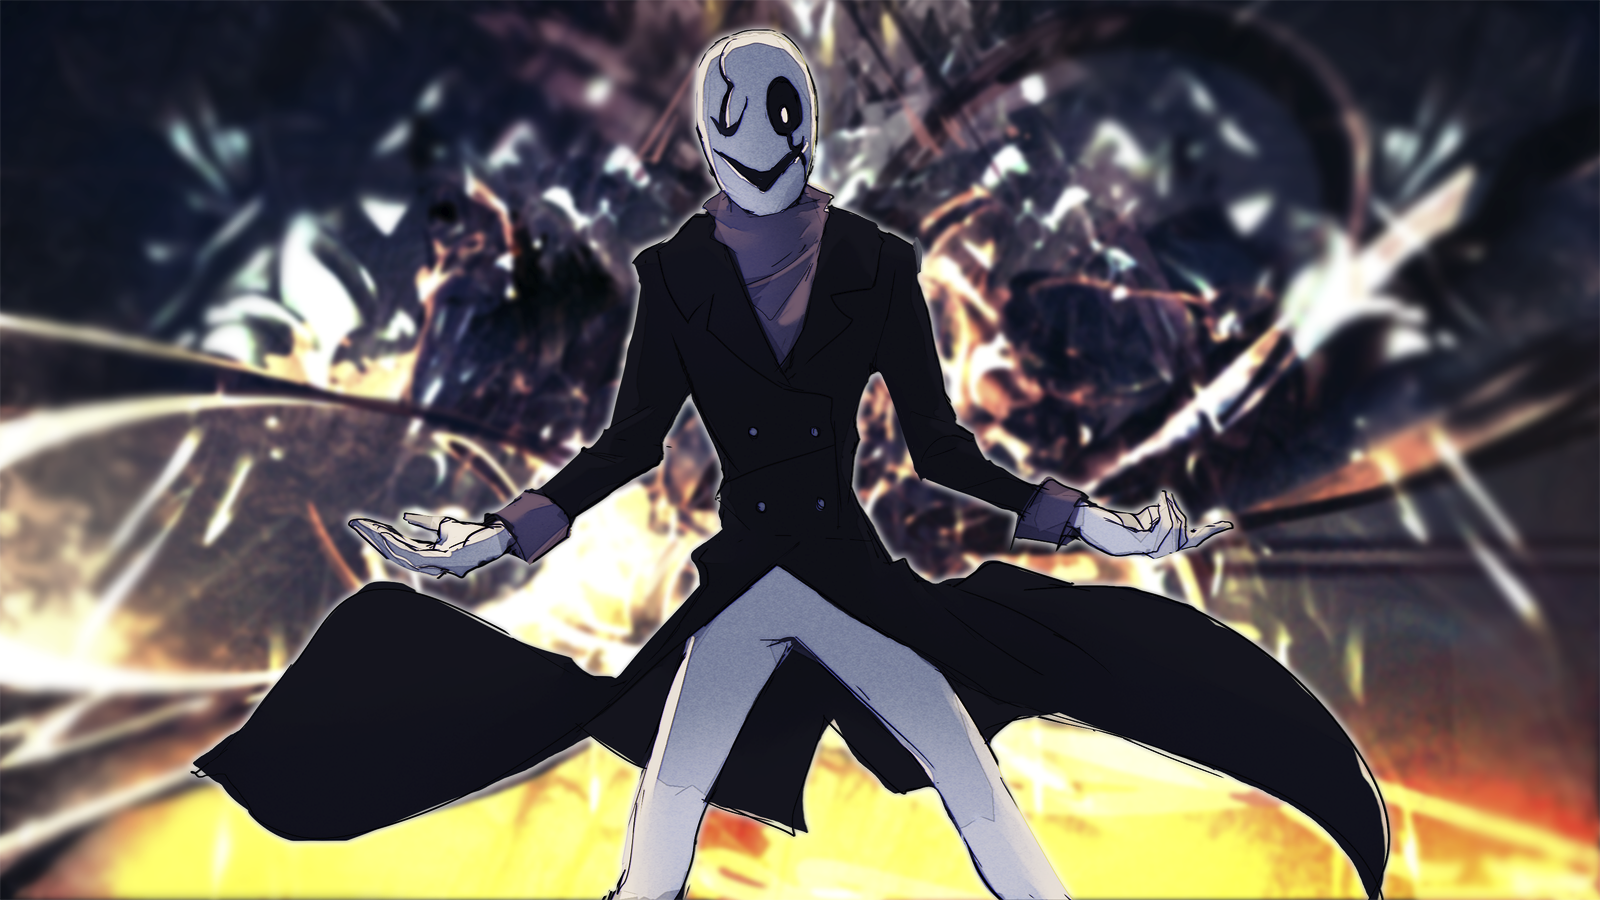 W D Gaster The Ancient Ones Wikia Fandom Powered By